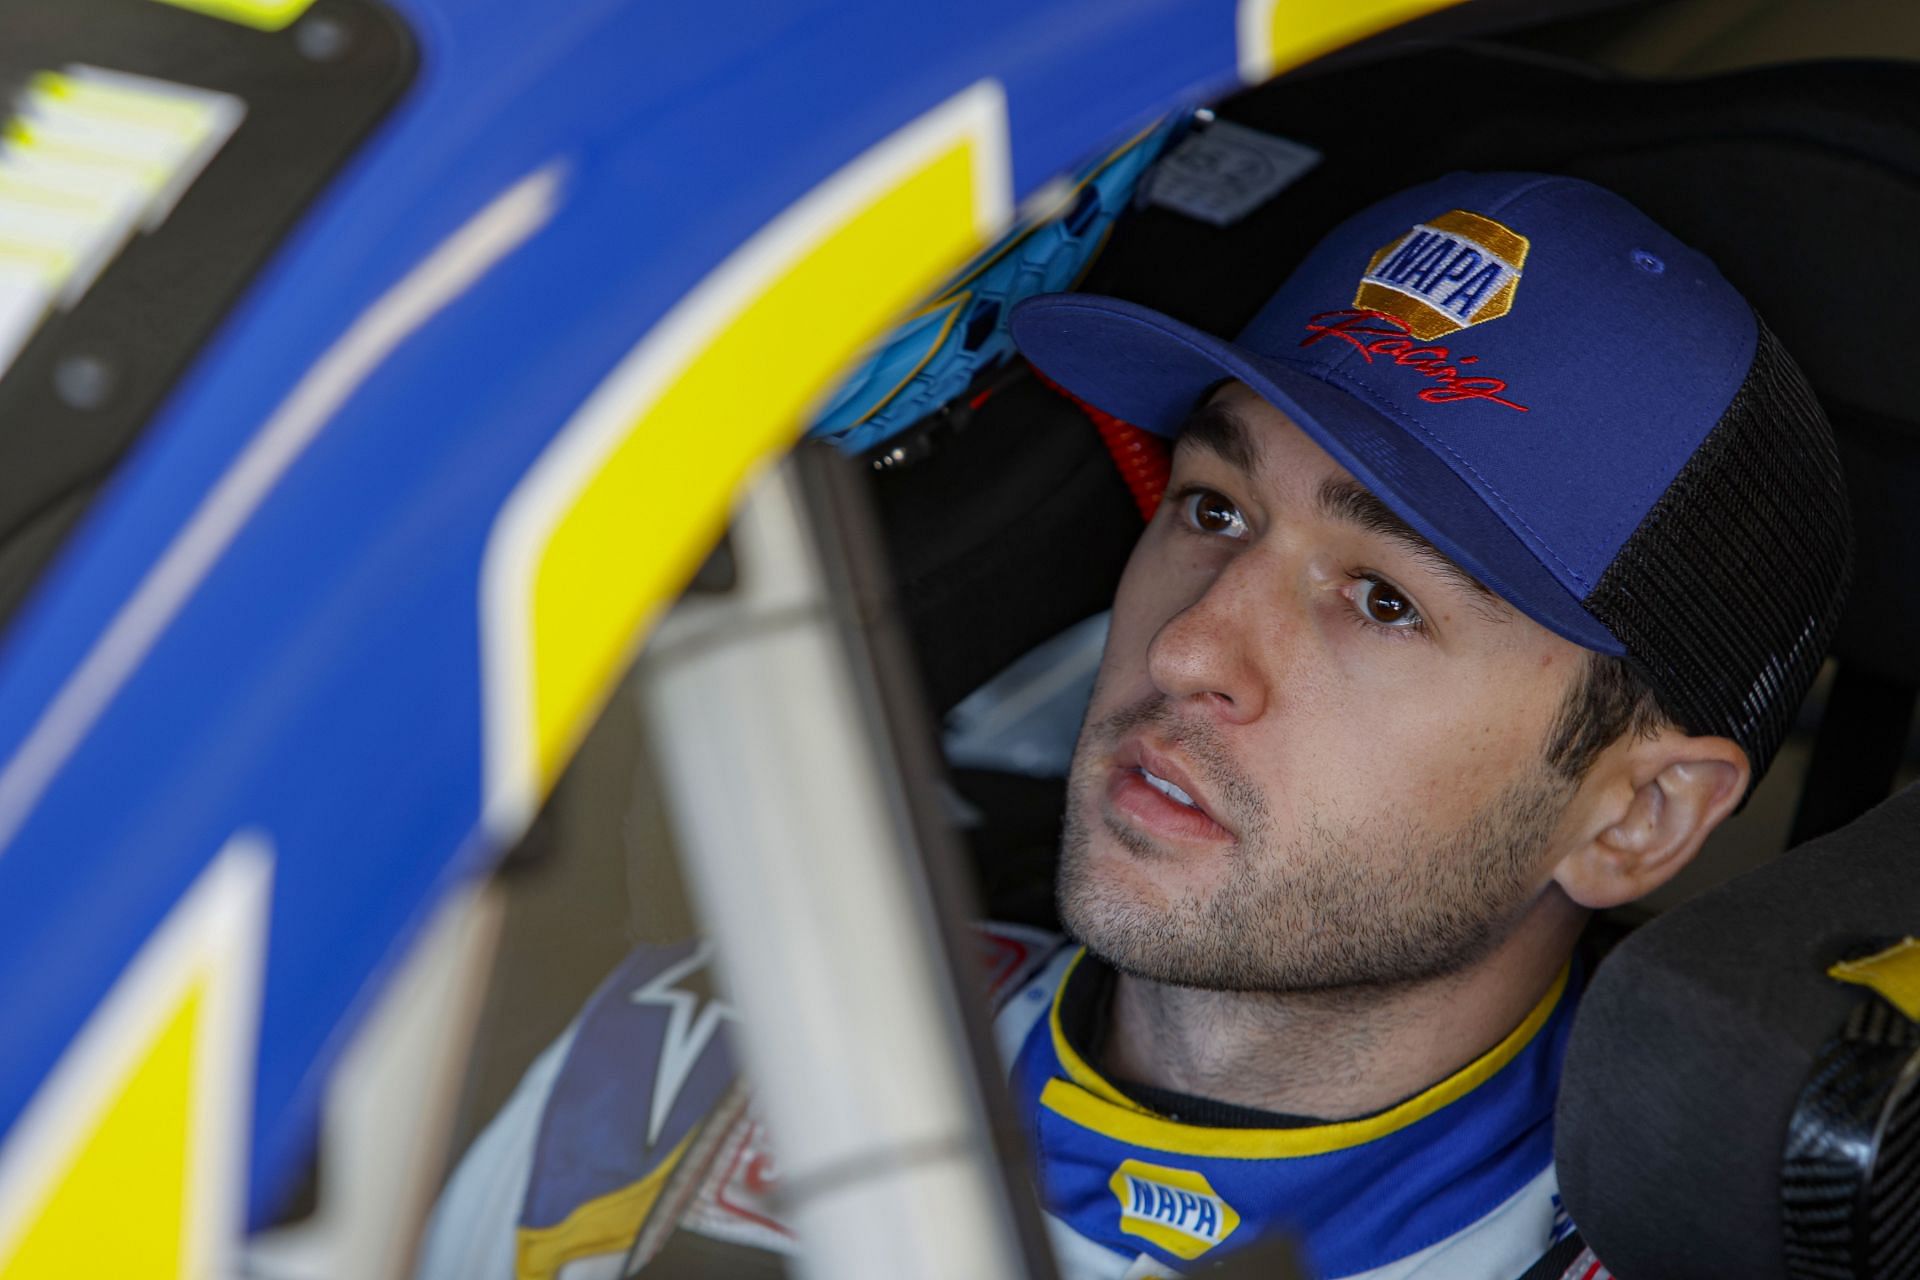 Chase Elliott sits in his car in the garage area during practice for the NASCAR Cup Series Folds of Honor QuikTrip 500 at Atlanta Motor Speedway